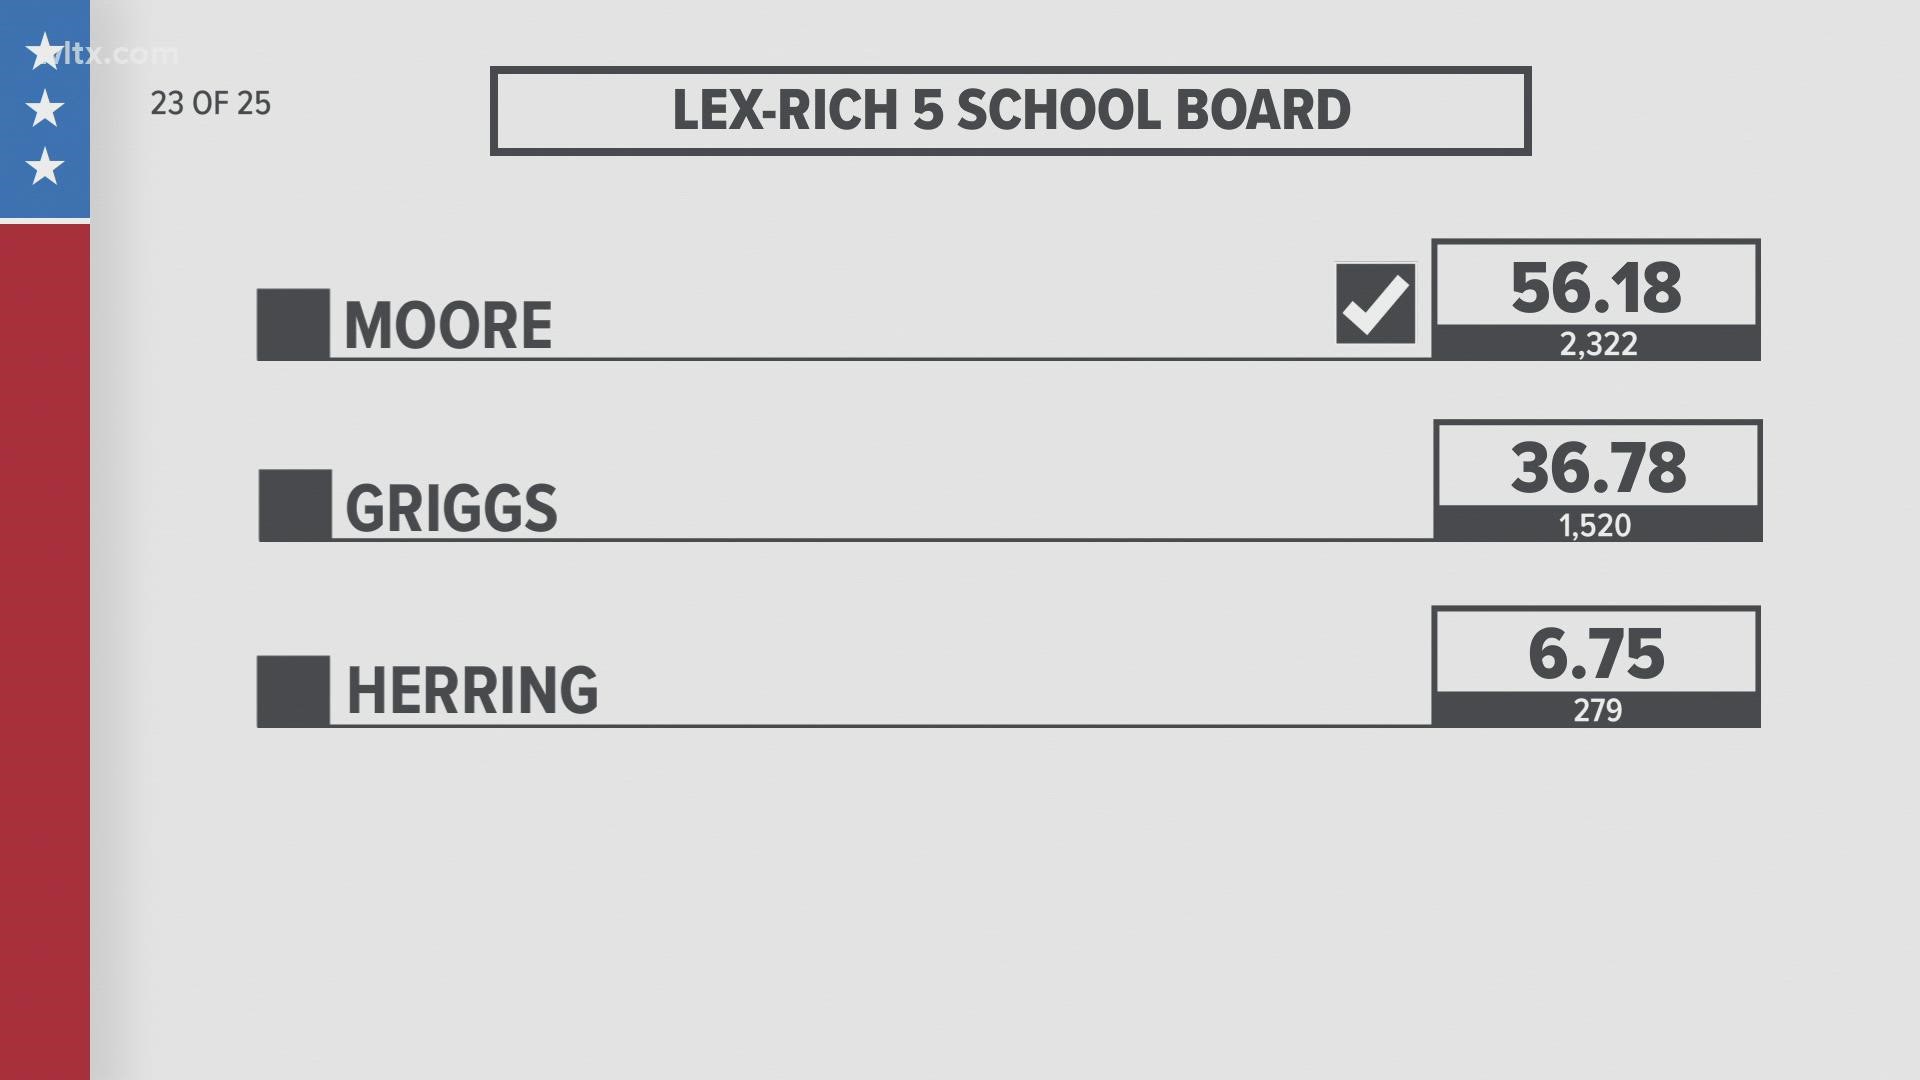 Voters in Lexington-Richland School District Five selected a new school board member in a special election held on Tuesday.